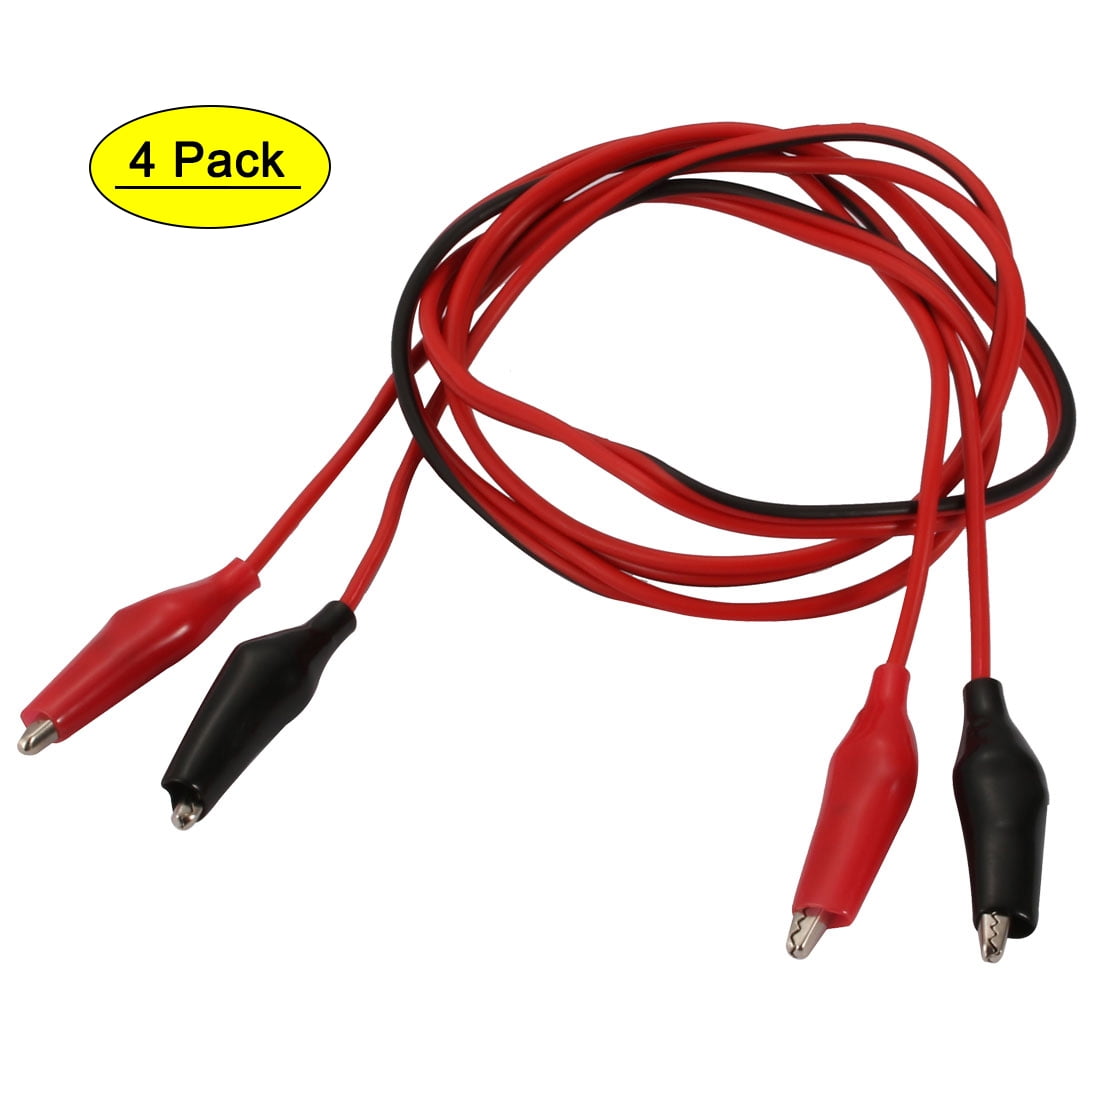 Pair of Dual Red & Black Test Leads with Alligator Clips Jumper Cable 